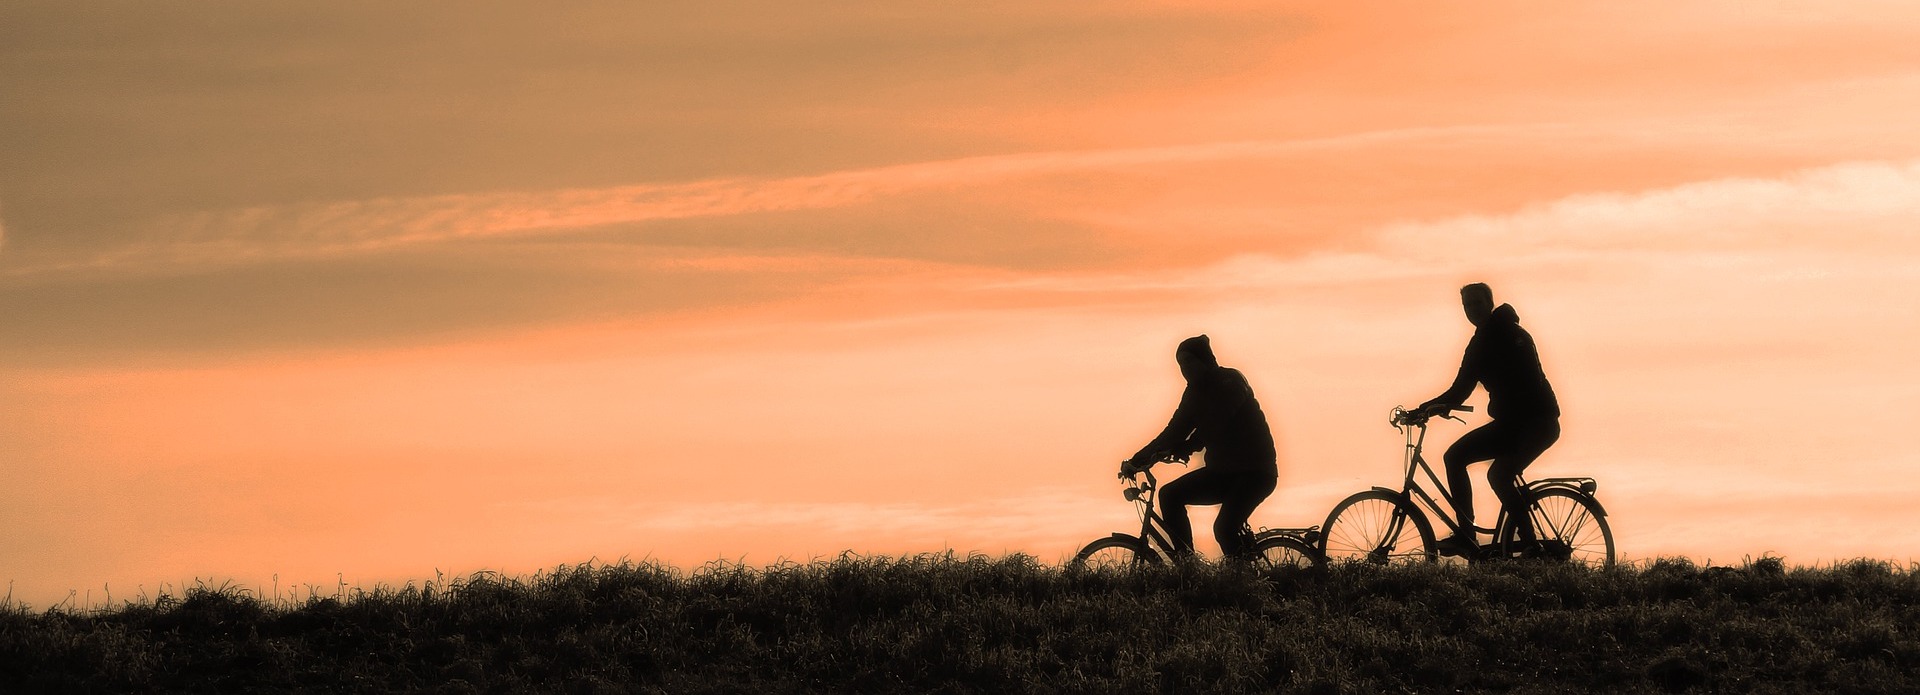 Cycling in the sunset